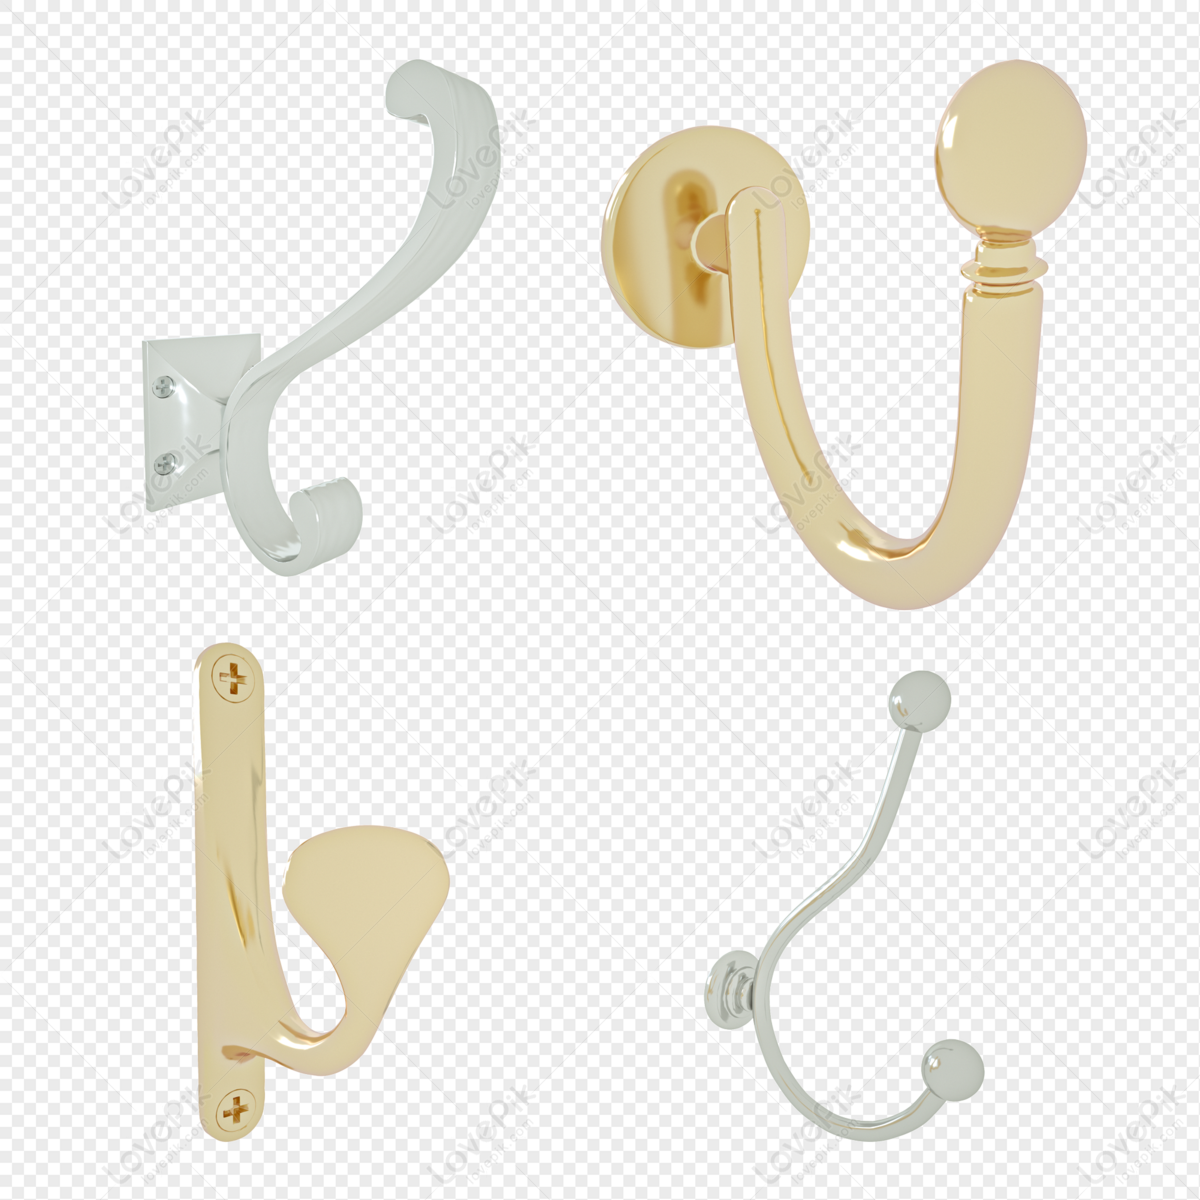 Wall Hook PNG Image, Hooks And Schoolbags On Cartoon Walls, Bag, Element,  Package PNG Image For Free Download